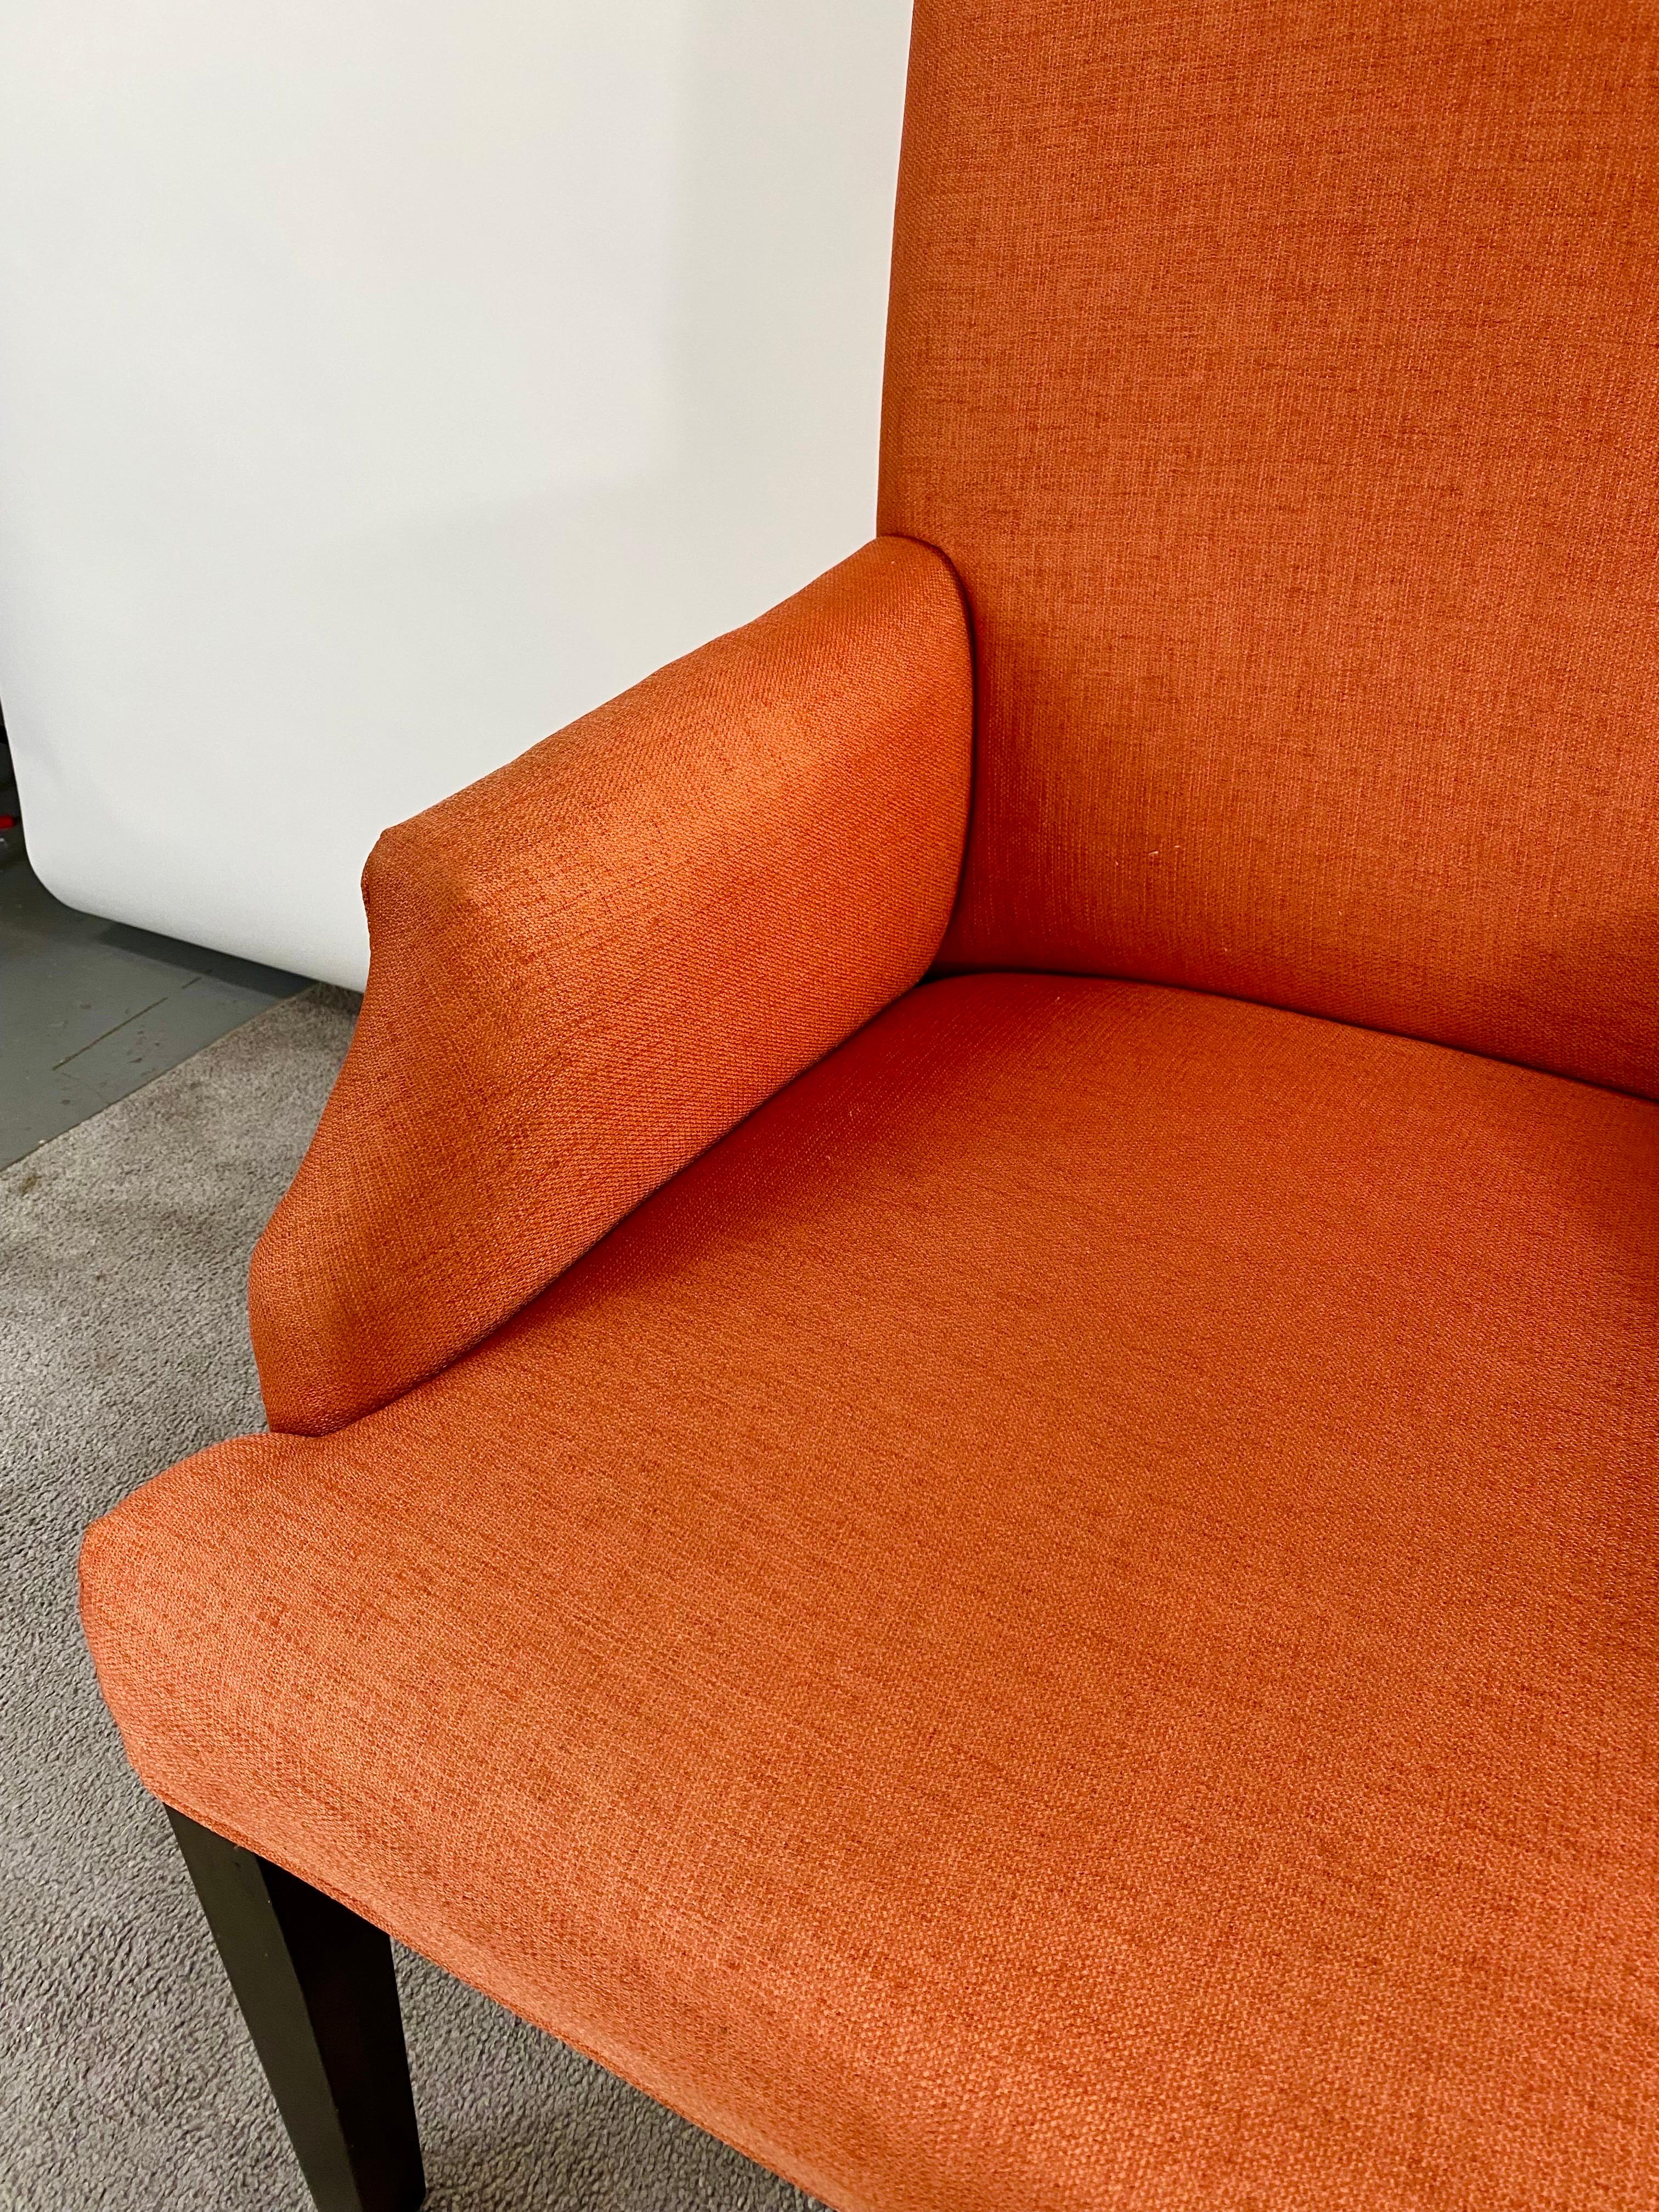 Edward Wormly Style Lounge or Side Chairs in Orange Hermes Upholstery, Pair  7